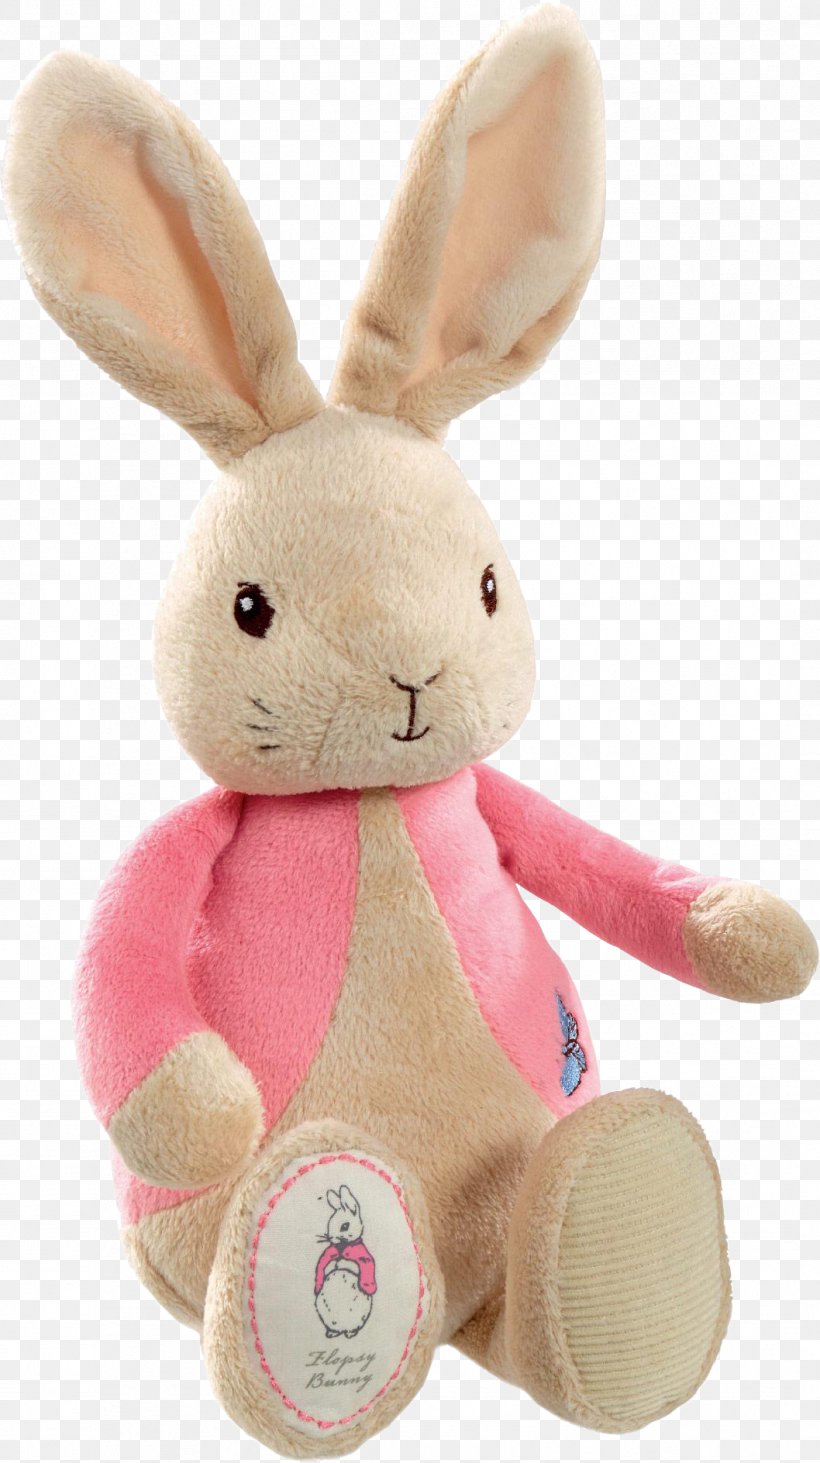 The Tale Of The Flopsy Bunnies The Tale Of Peter Rabbit The Tale Of Mr. Jeremy Fisher The Complete Tales, PNG, 1058x1888px, Tale Of The Flopsy Bunnies, Baby Rattle, Beatrix Potter, Book, Complete Tales Download Free